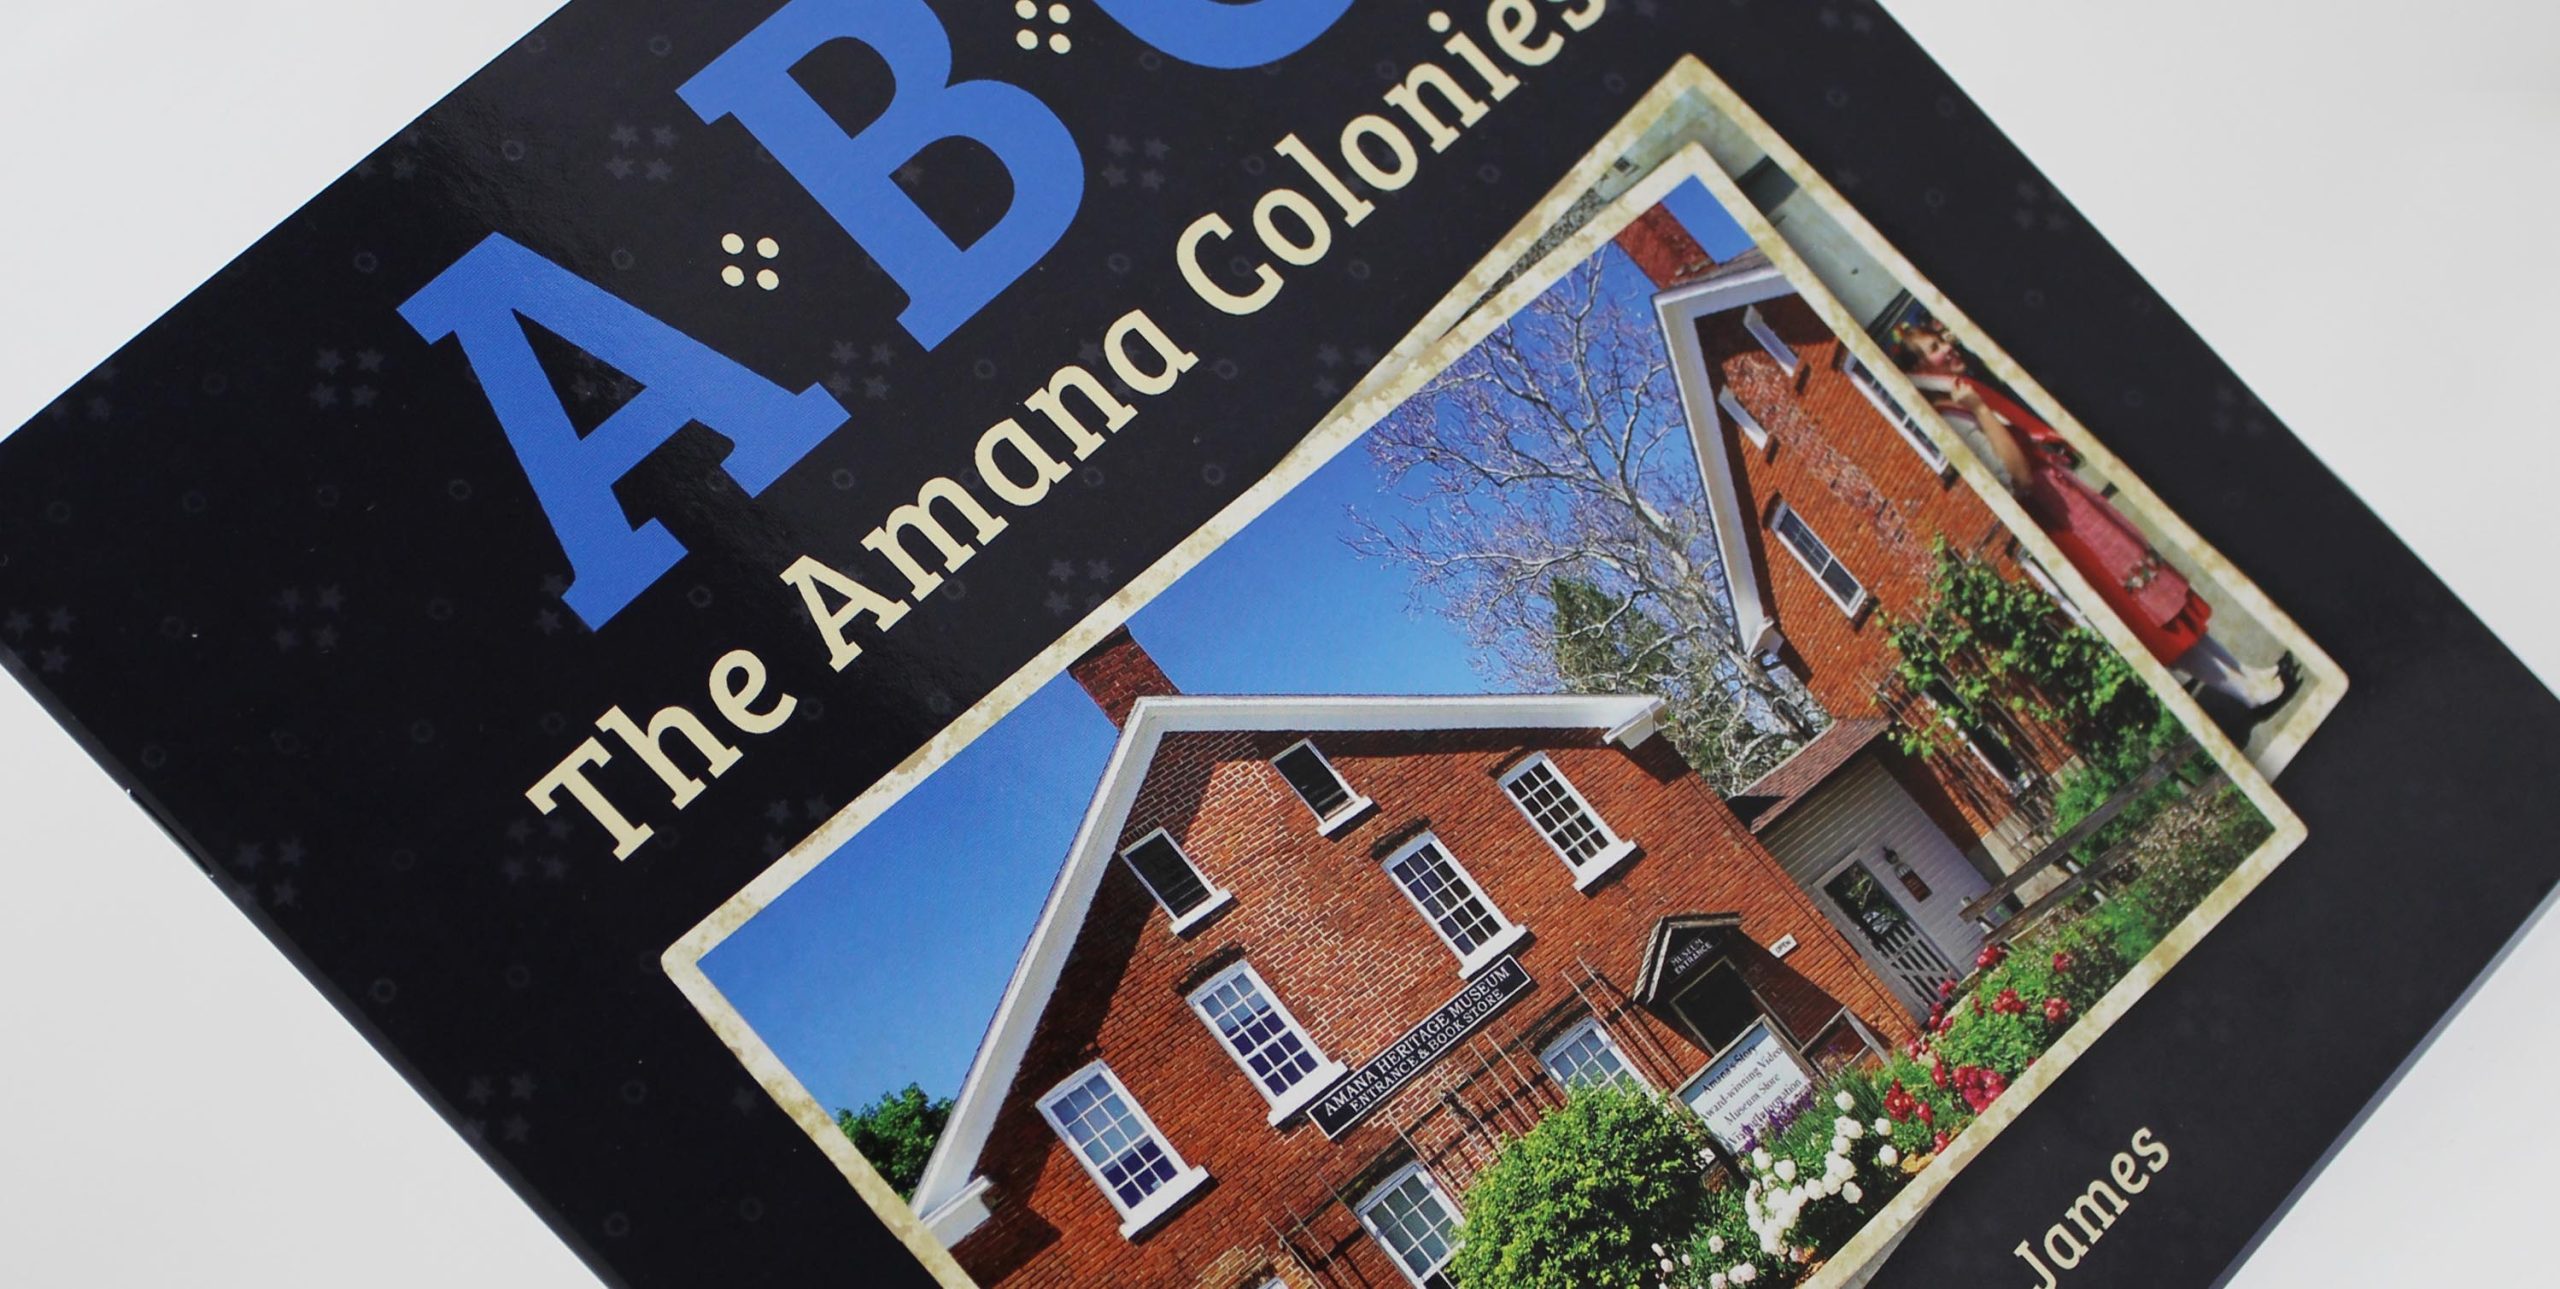 ABC: The Amana Colonies book cover